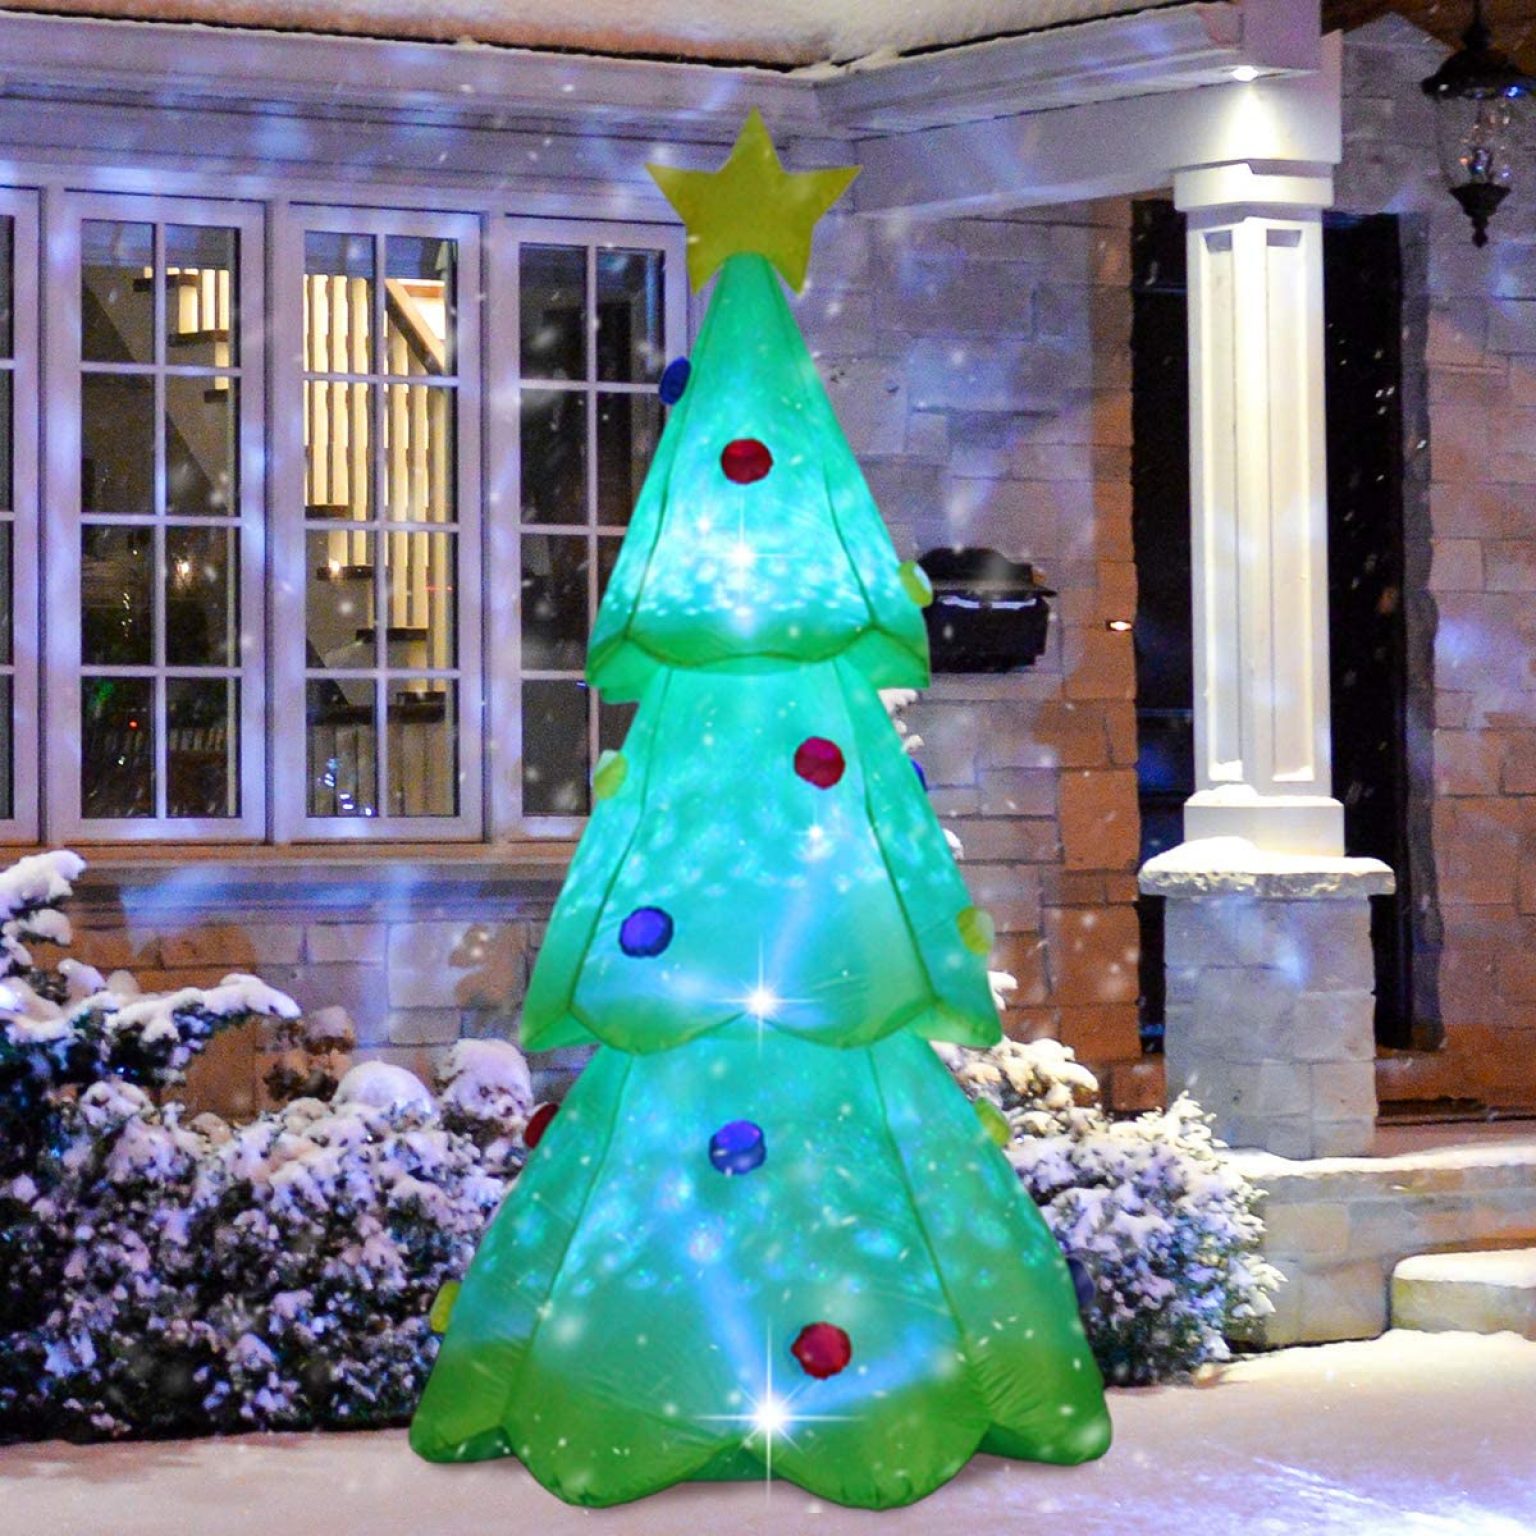 10 Cool Christmas Yard Inflatables to Impress Your Neighbors - Mad ...